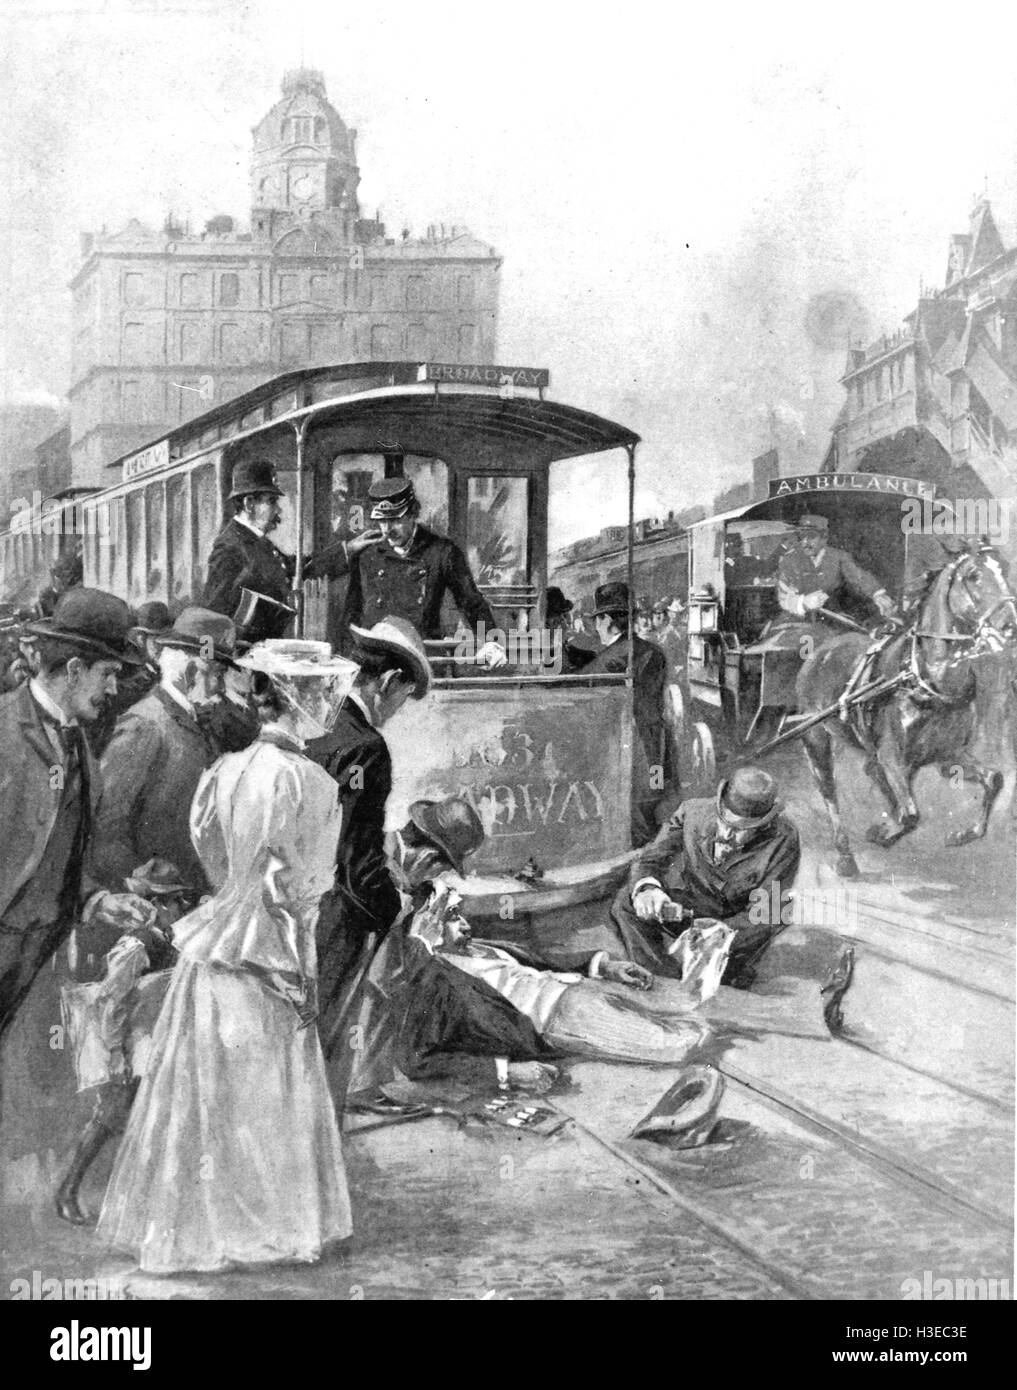 BROADWAY ACCIDENT  Tram railway incident in New York about 1905 Stock Photo